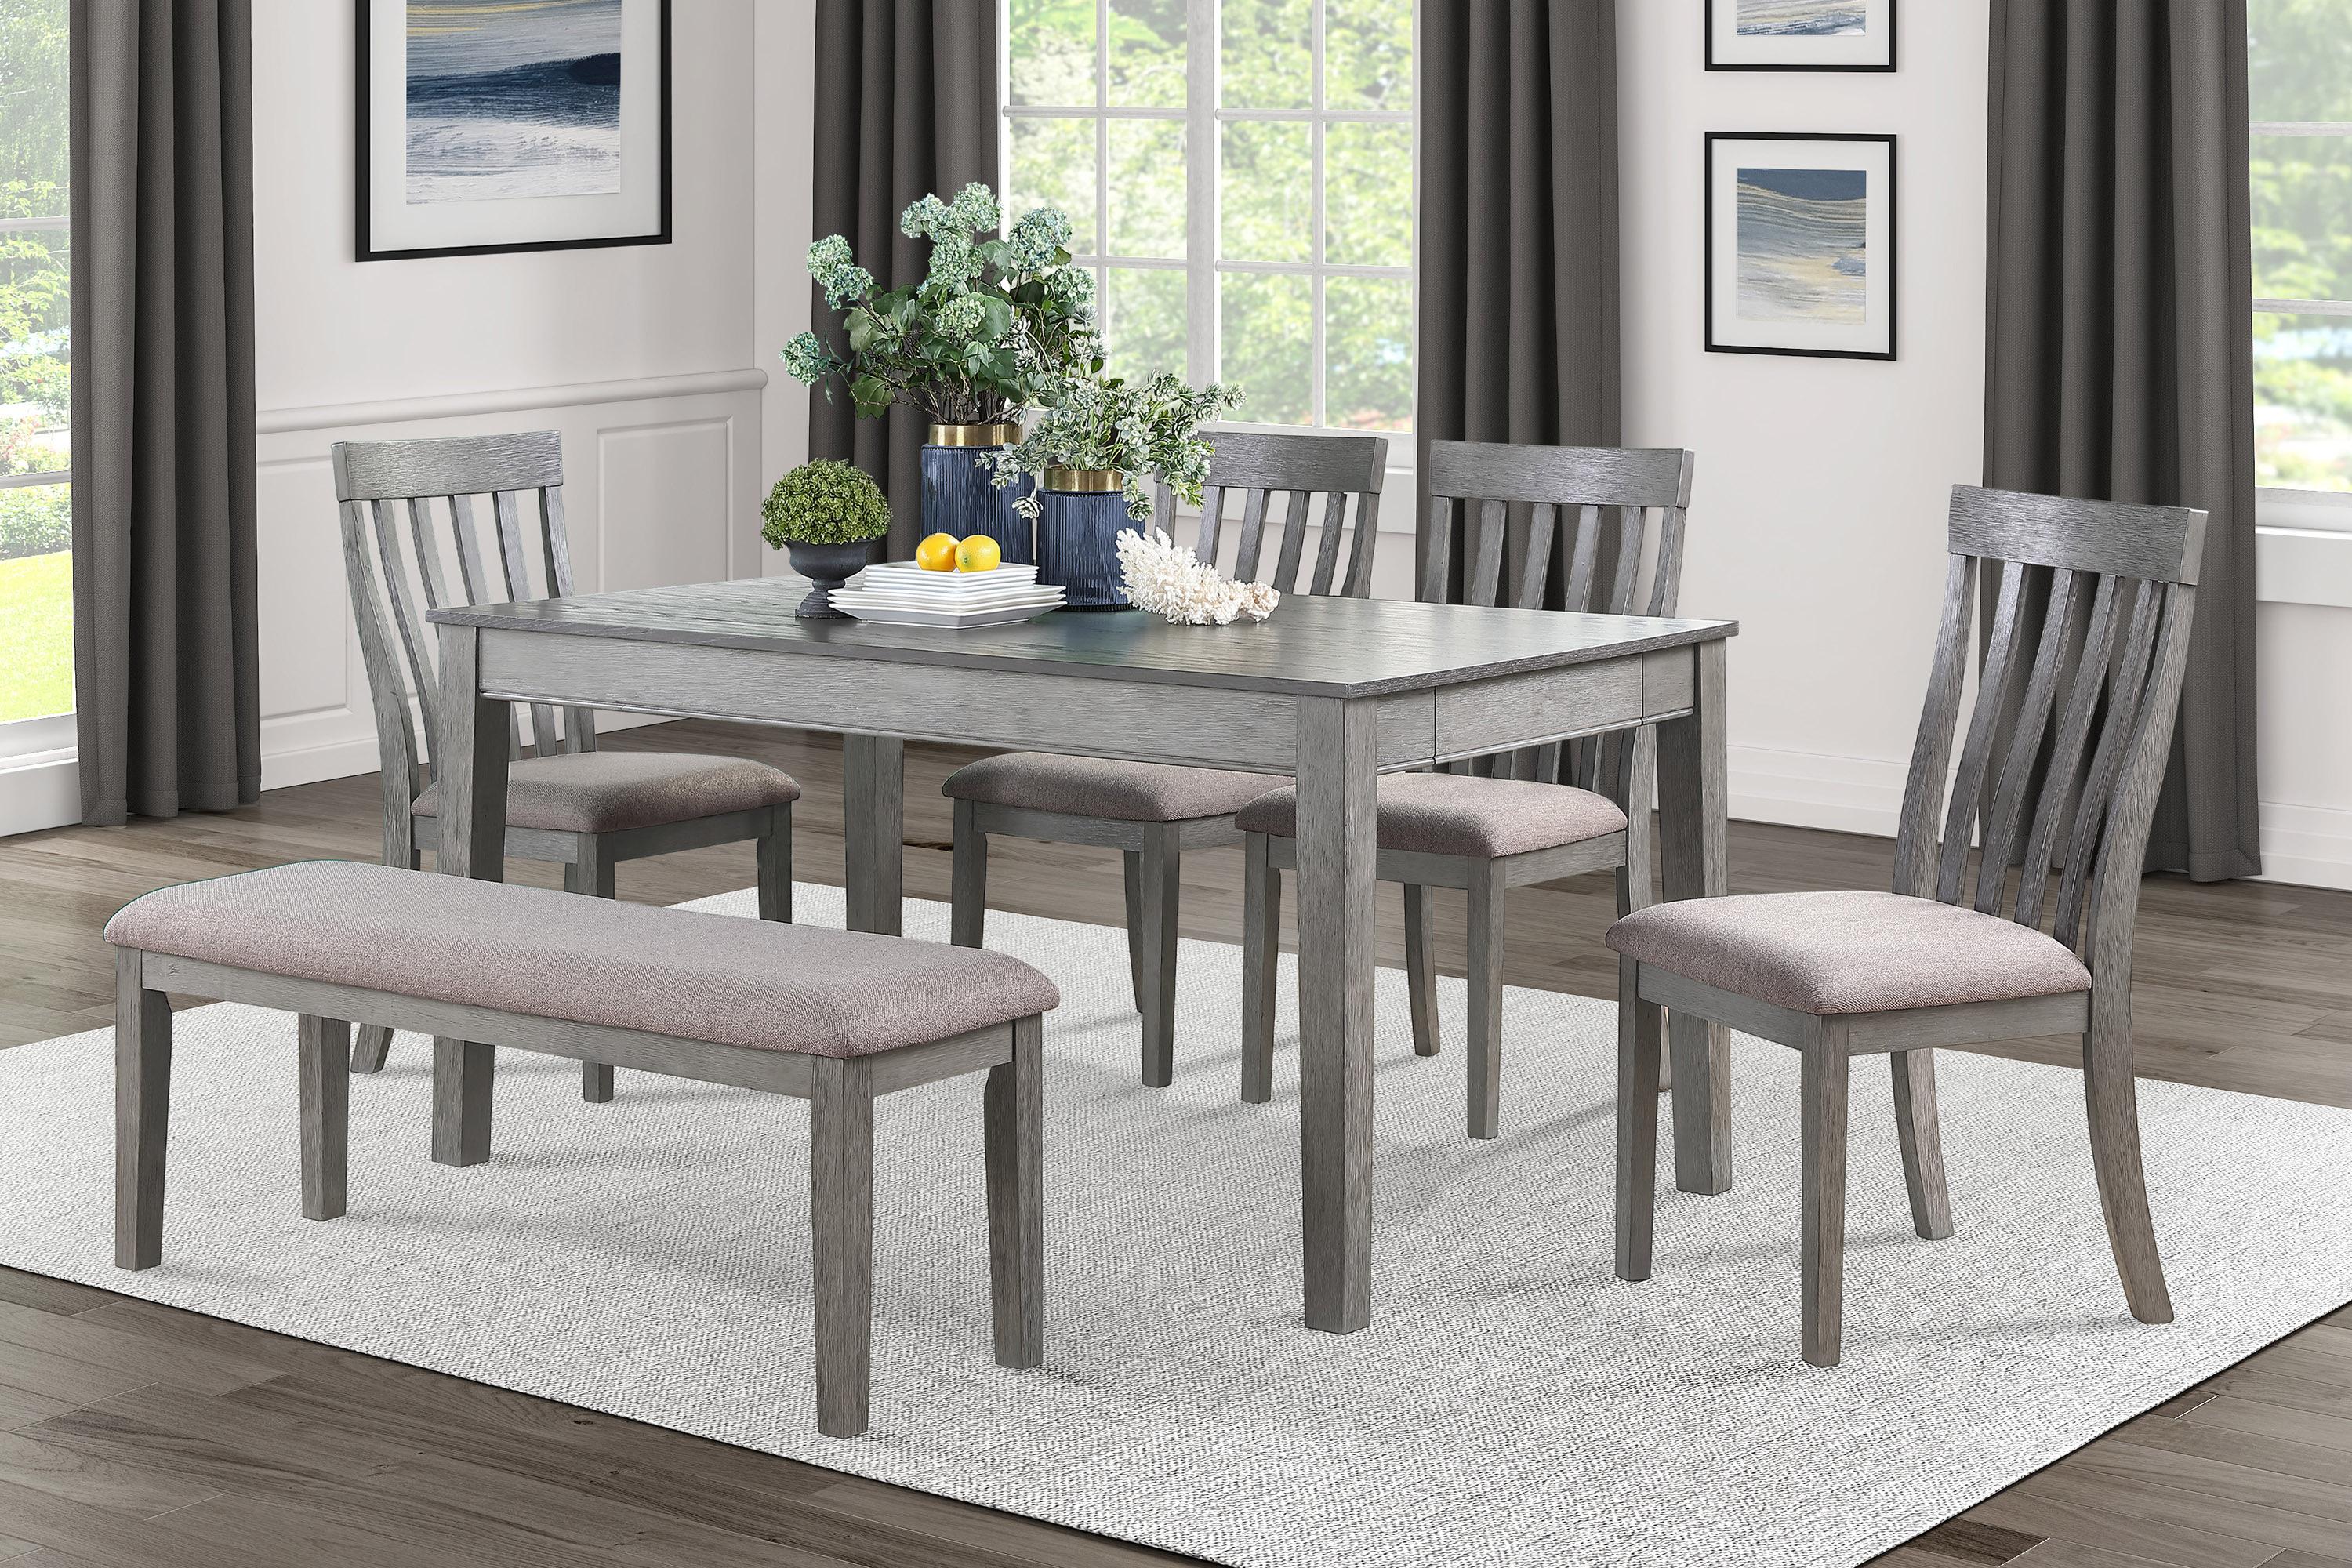 Transitional Dining Room Set 5706GY-60*7PC Armhurst 5706GY-60*7PC in Gray Polyester